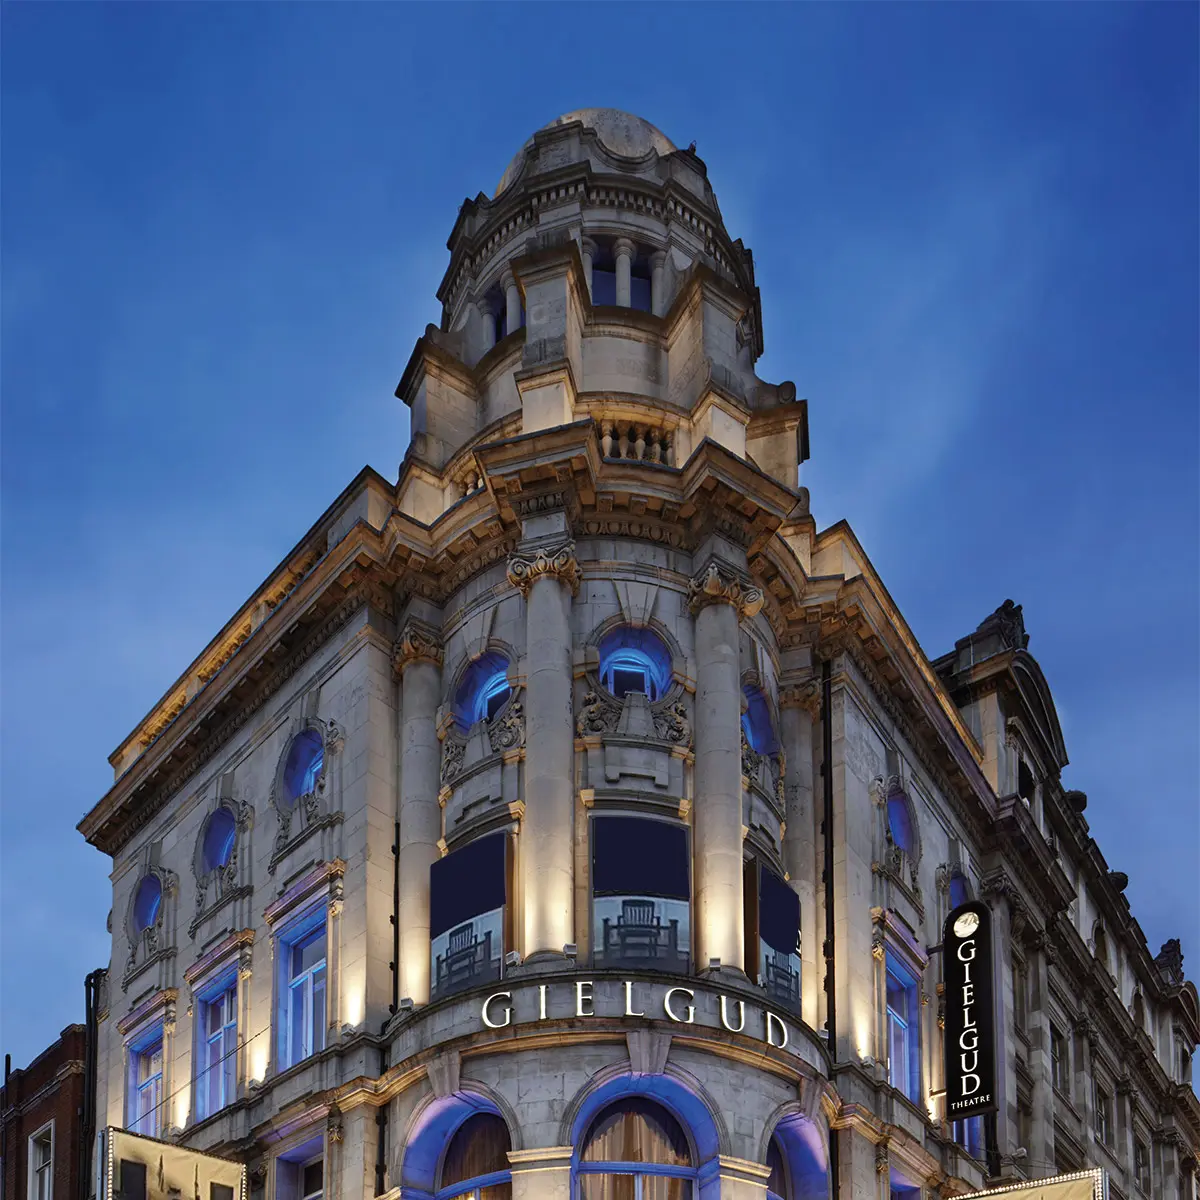 Gielgud Theatre external view at night